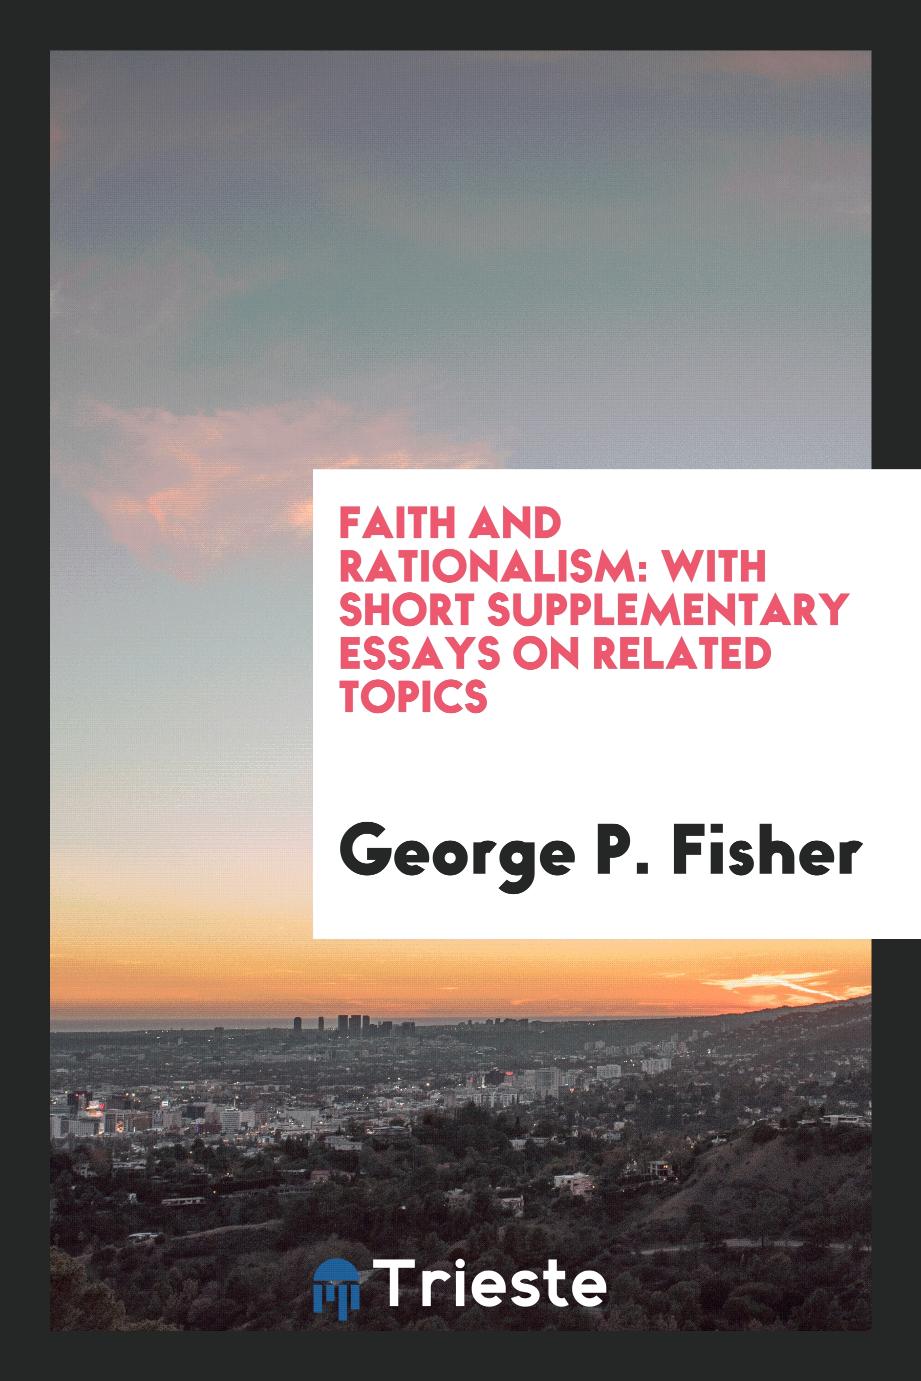 Faith and Rationalism: With Short Supplementary Essays on Related Topics